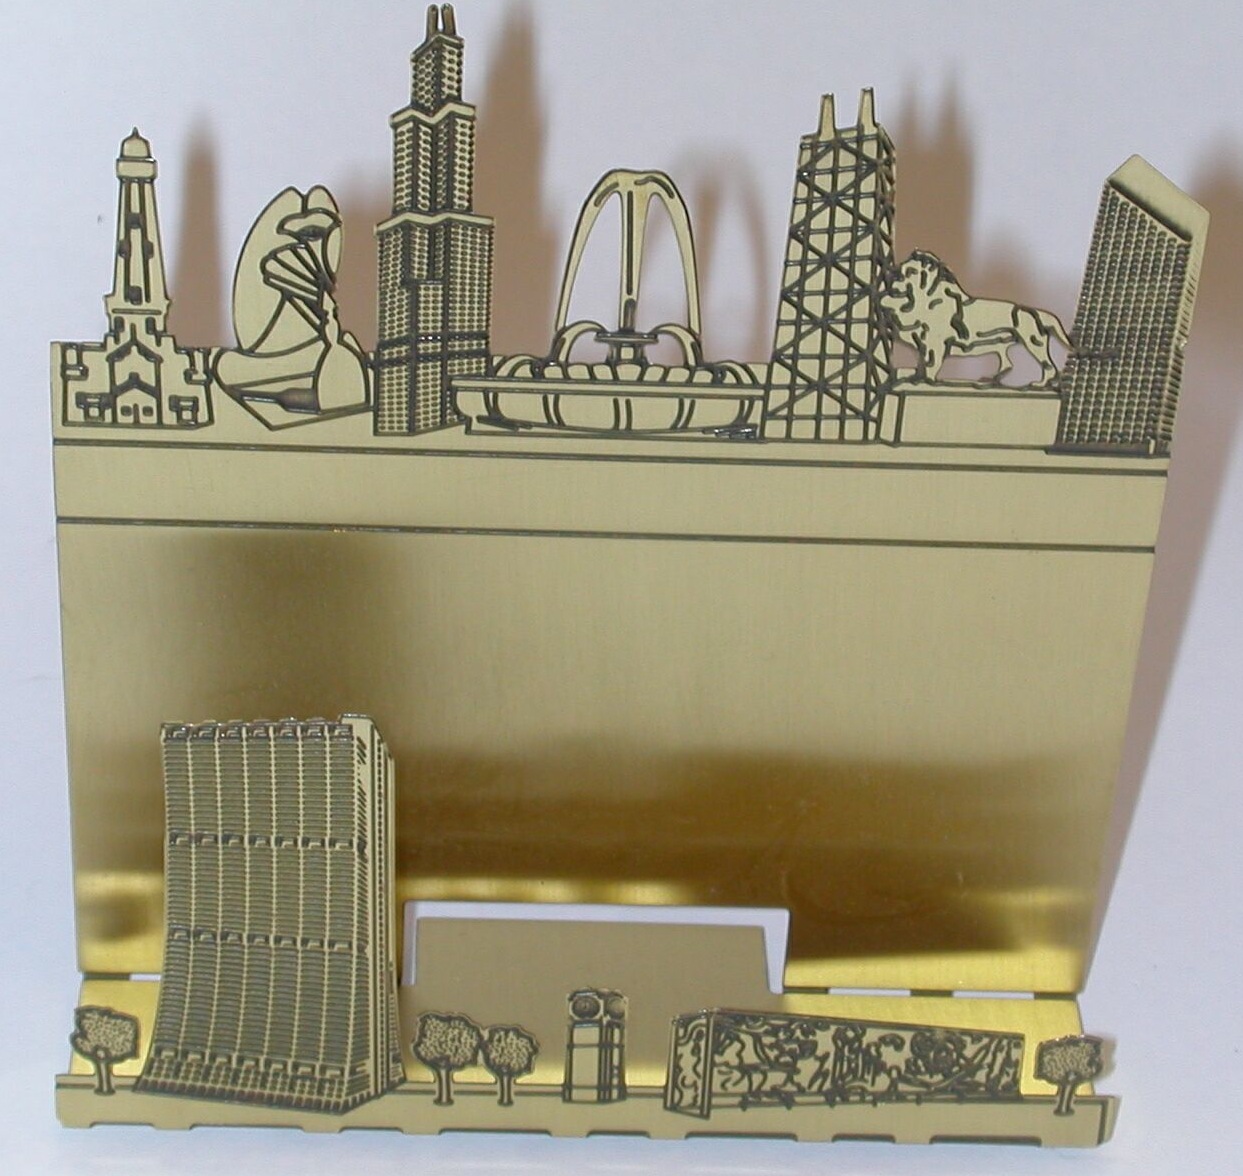 Etched business card holder, brass.